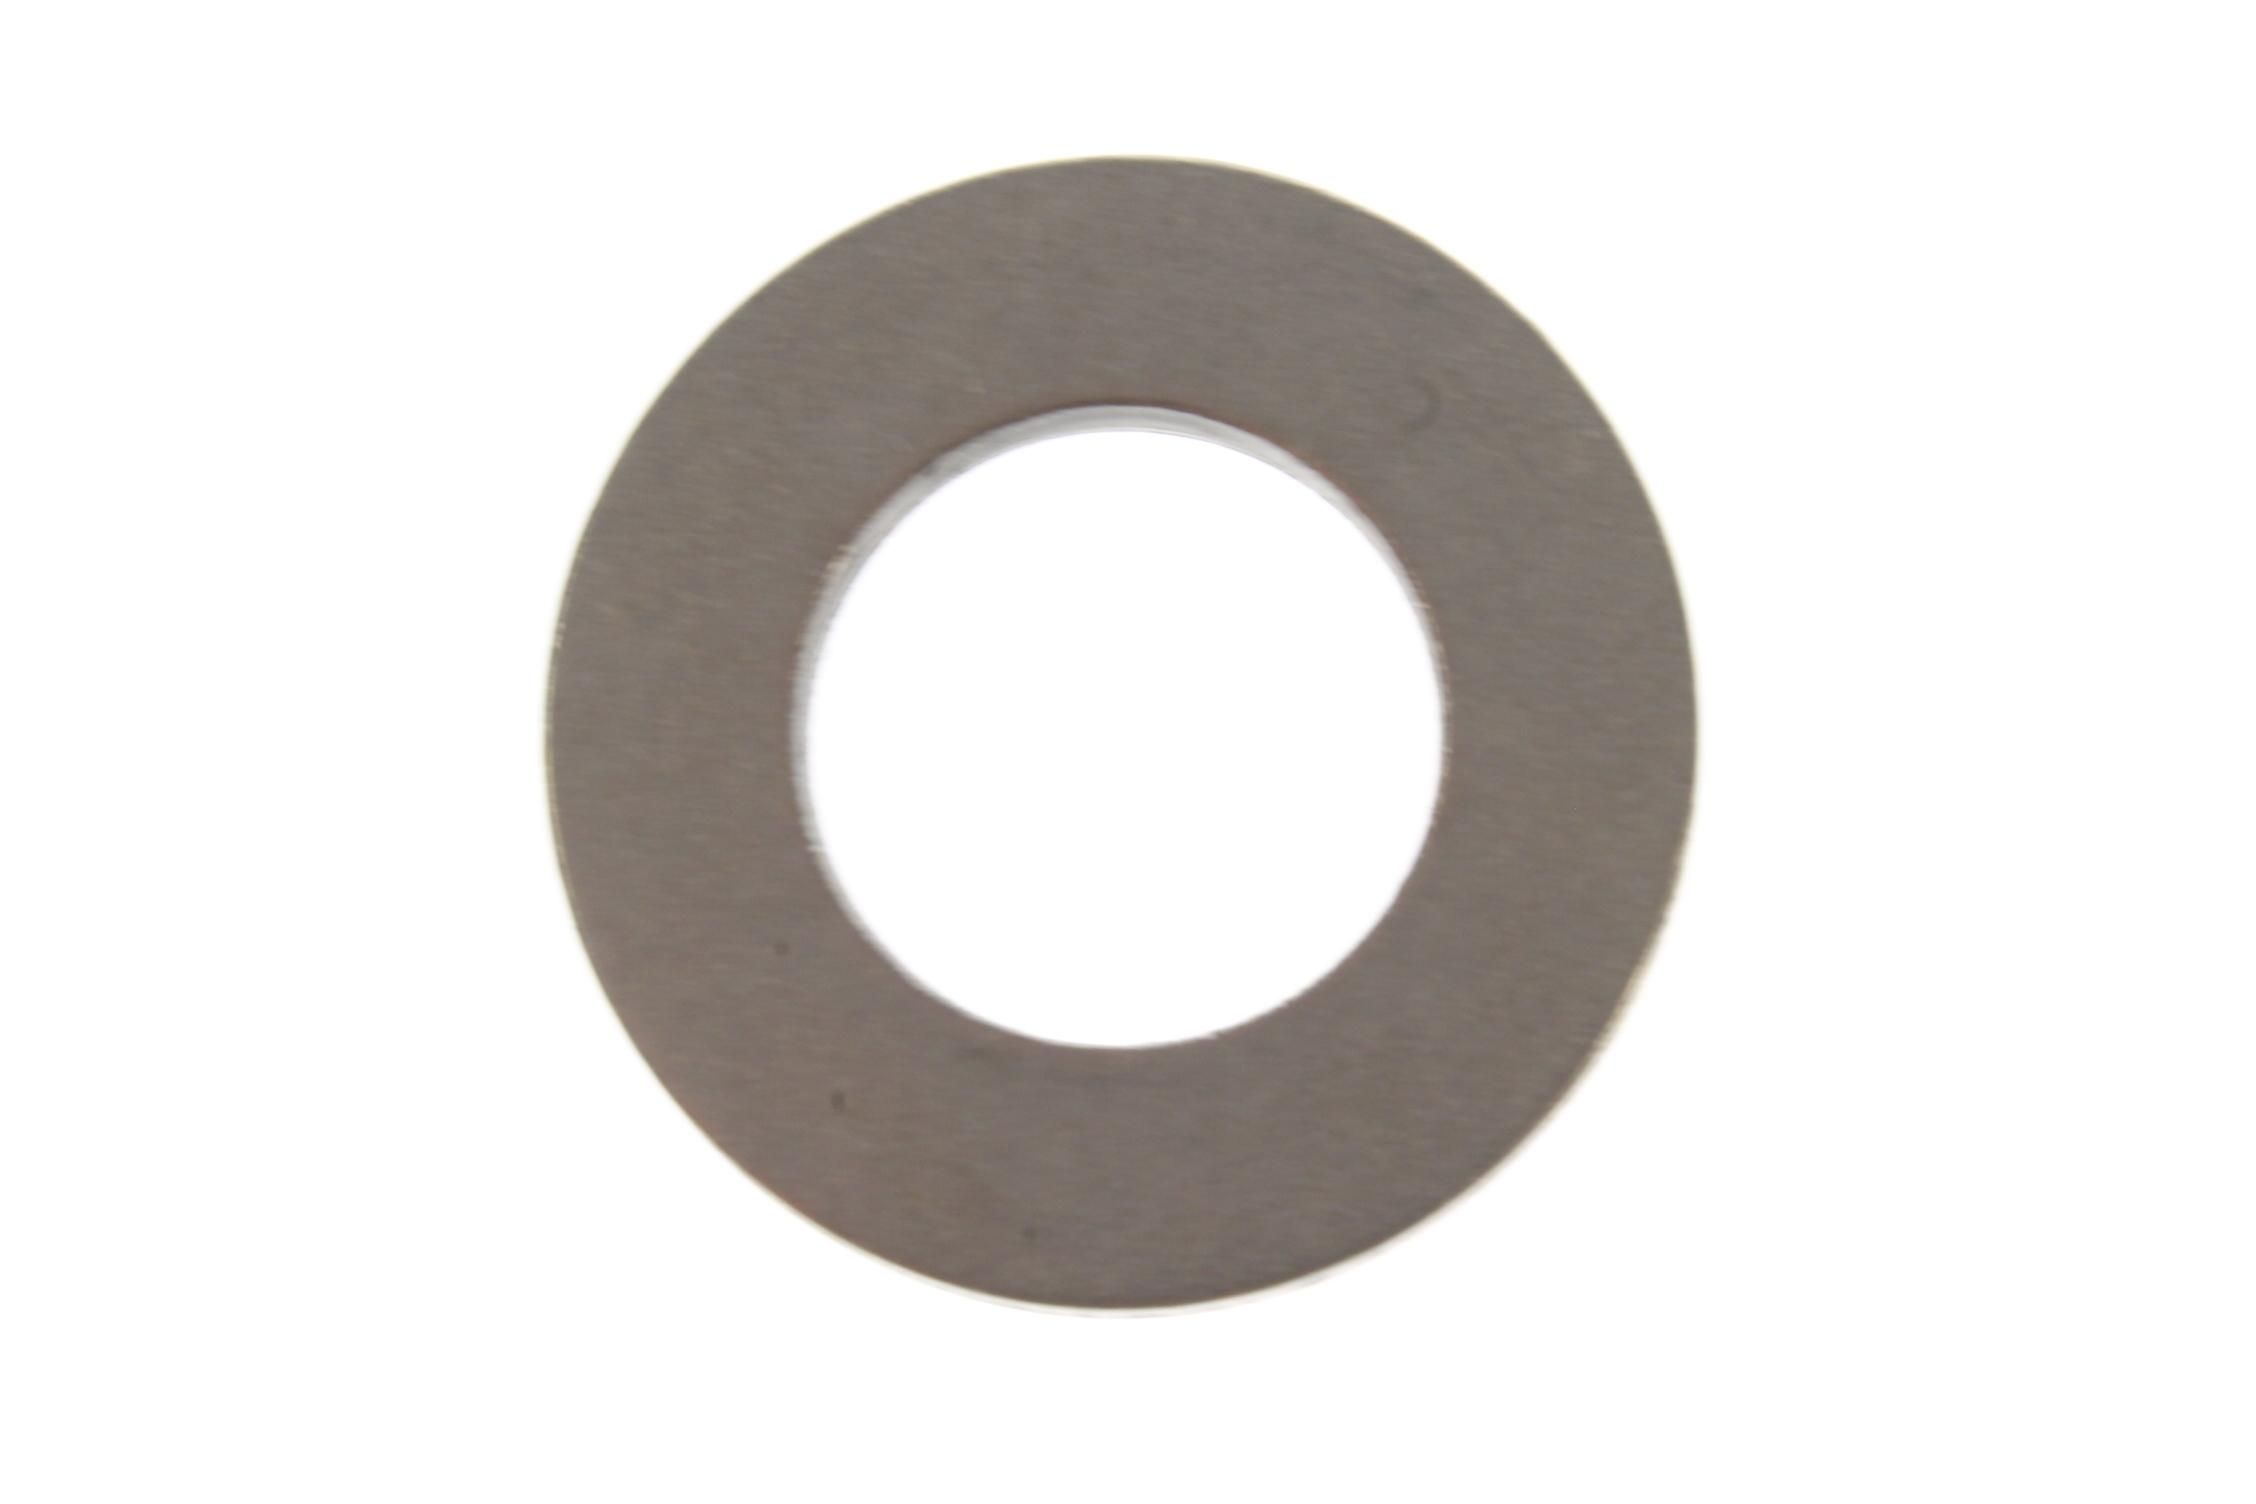 2MB-E7648-00-00 WASHER